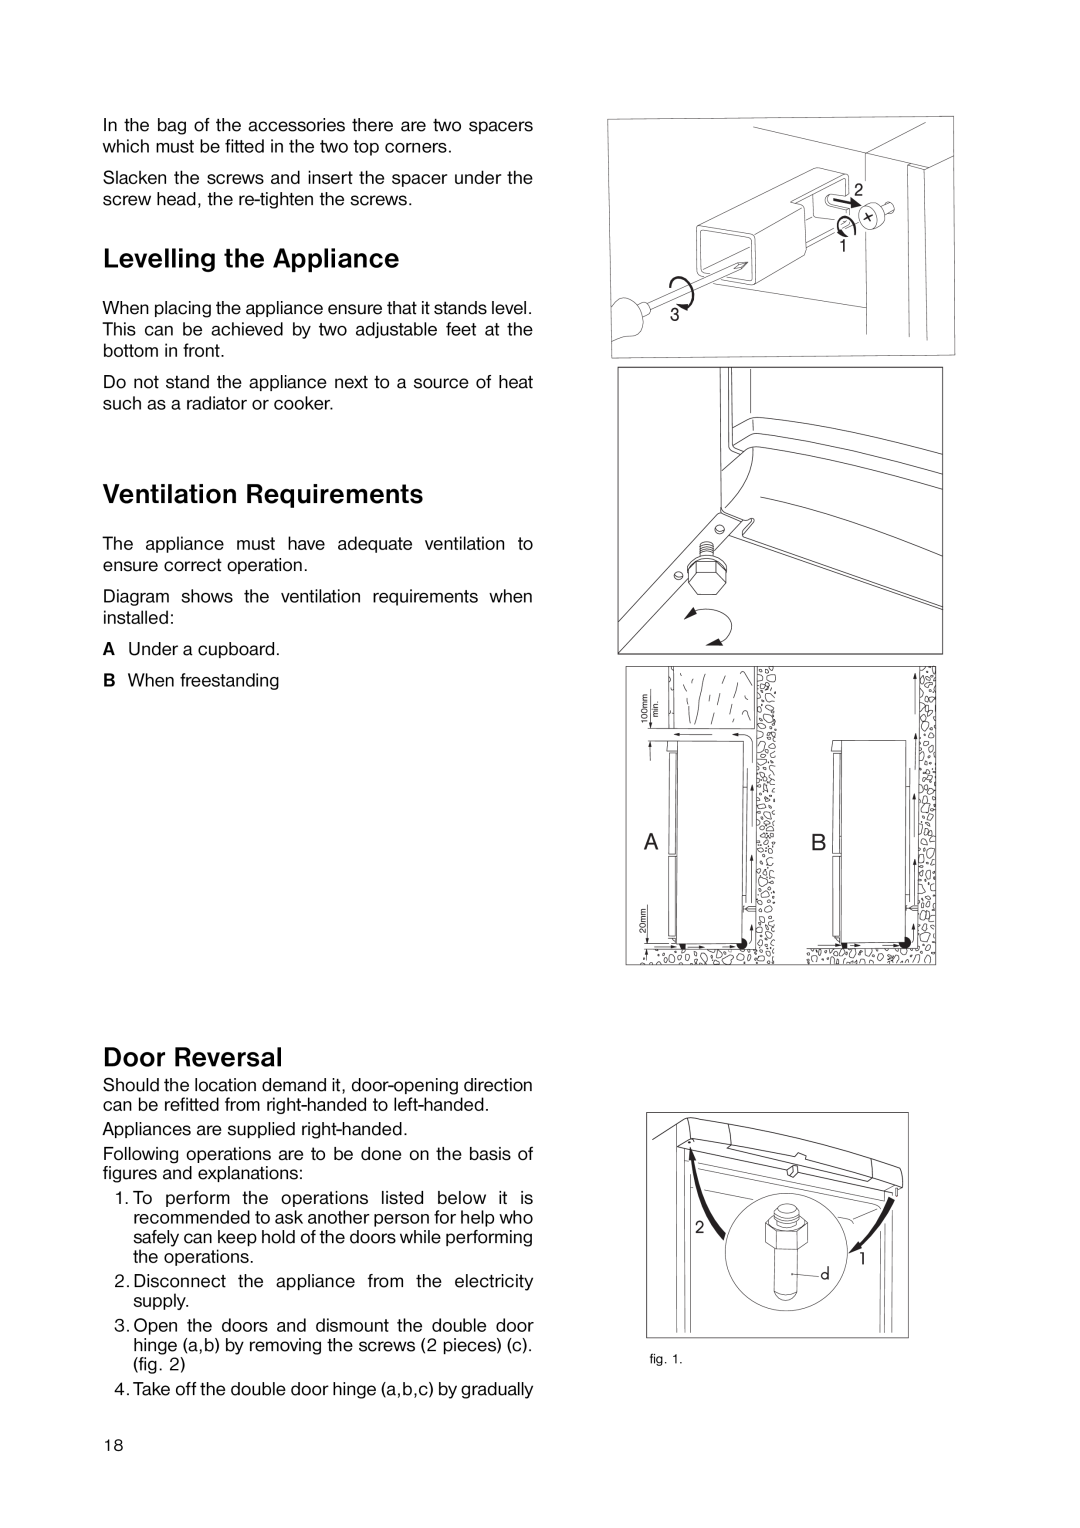 Zanussi ZNB 4051 manual Levelling the Appliance, Ventilation Requirements, Door Reversal 